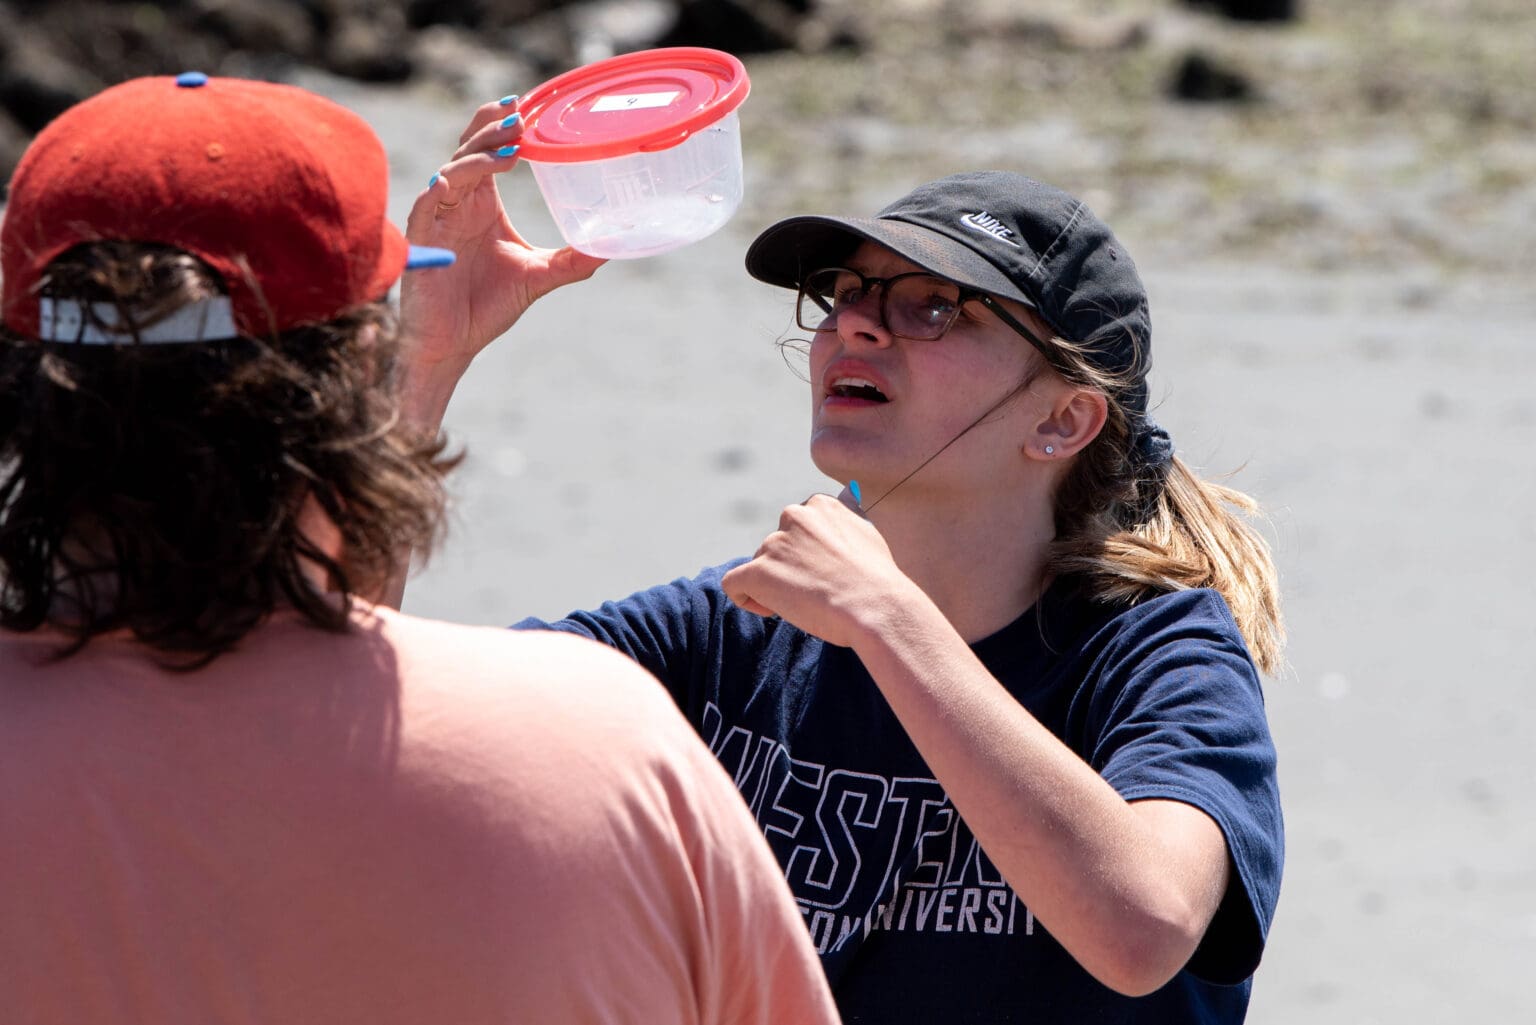 RE Sources intern Hannah Miller examines a group's collection of microplastic June 8 at H Street Beach. Miller organized a microplastic collection event